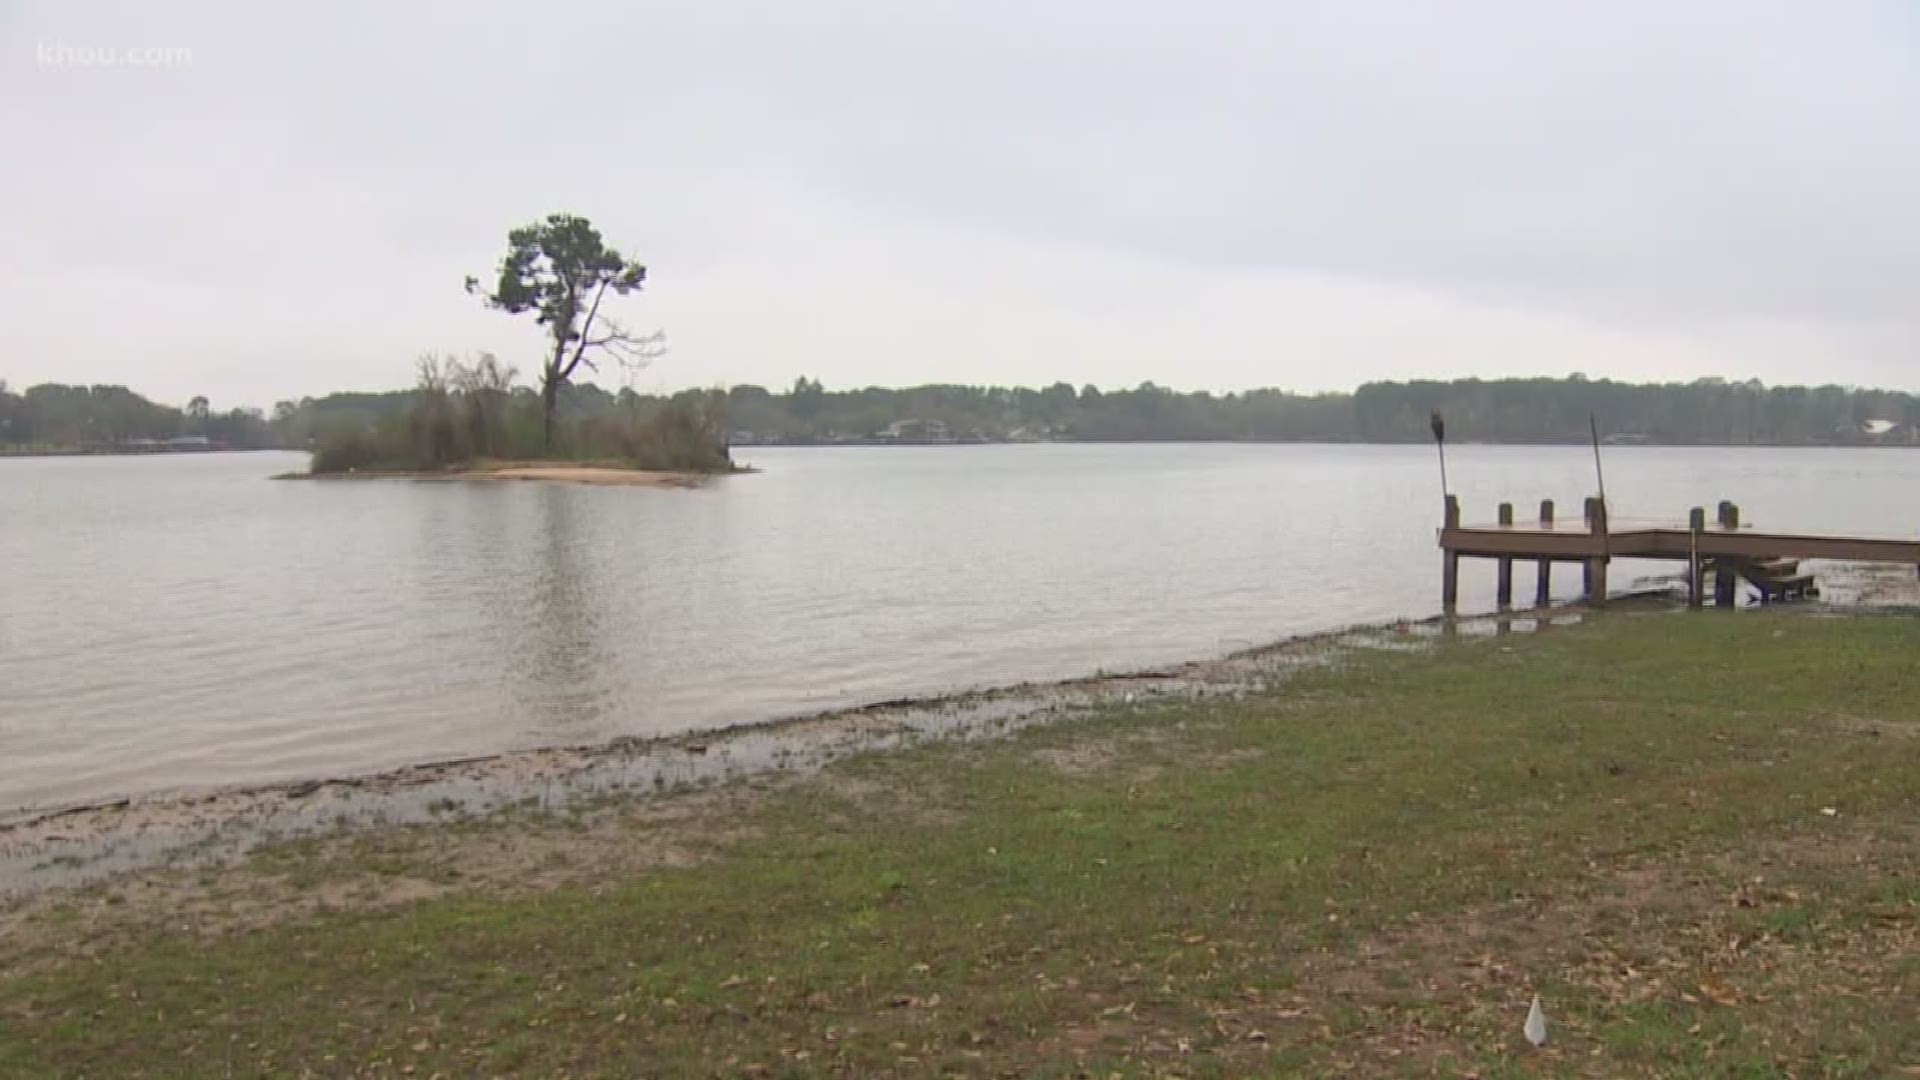 Residents don't believe the agency's lowering of lake levels to ease flooding downstream actually works.